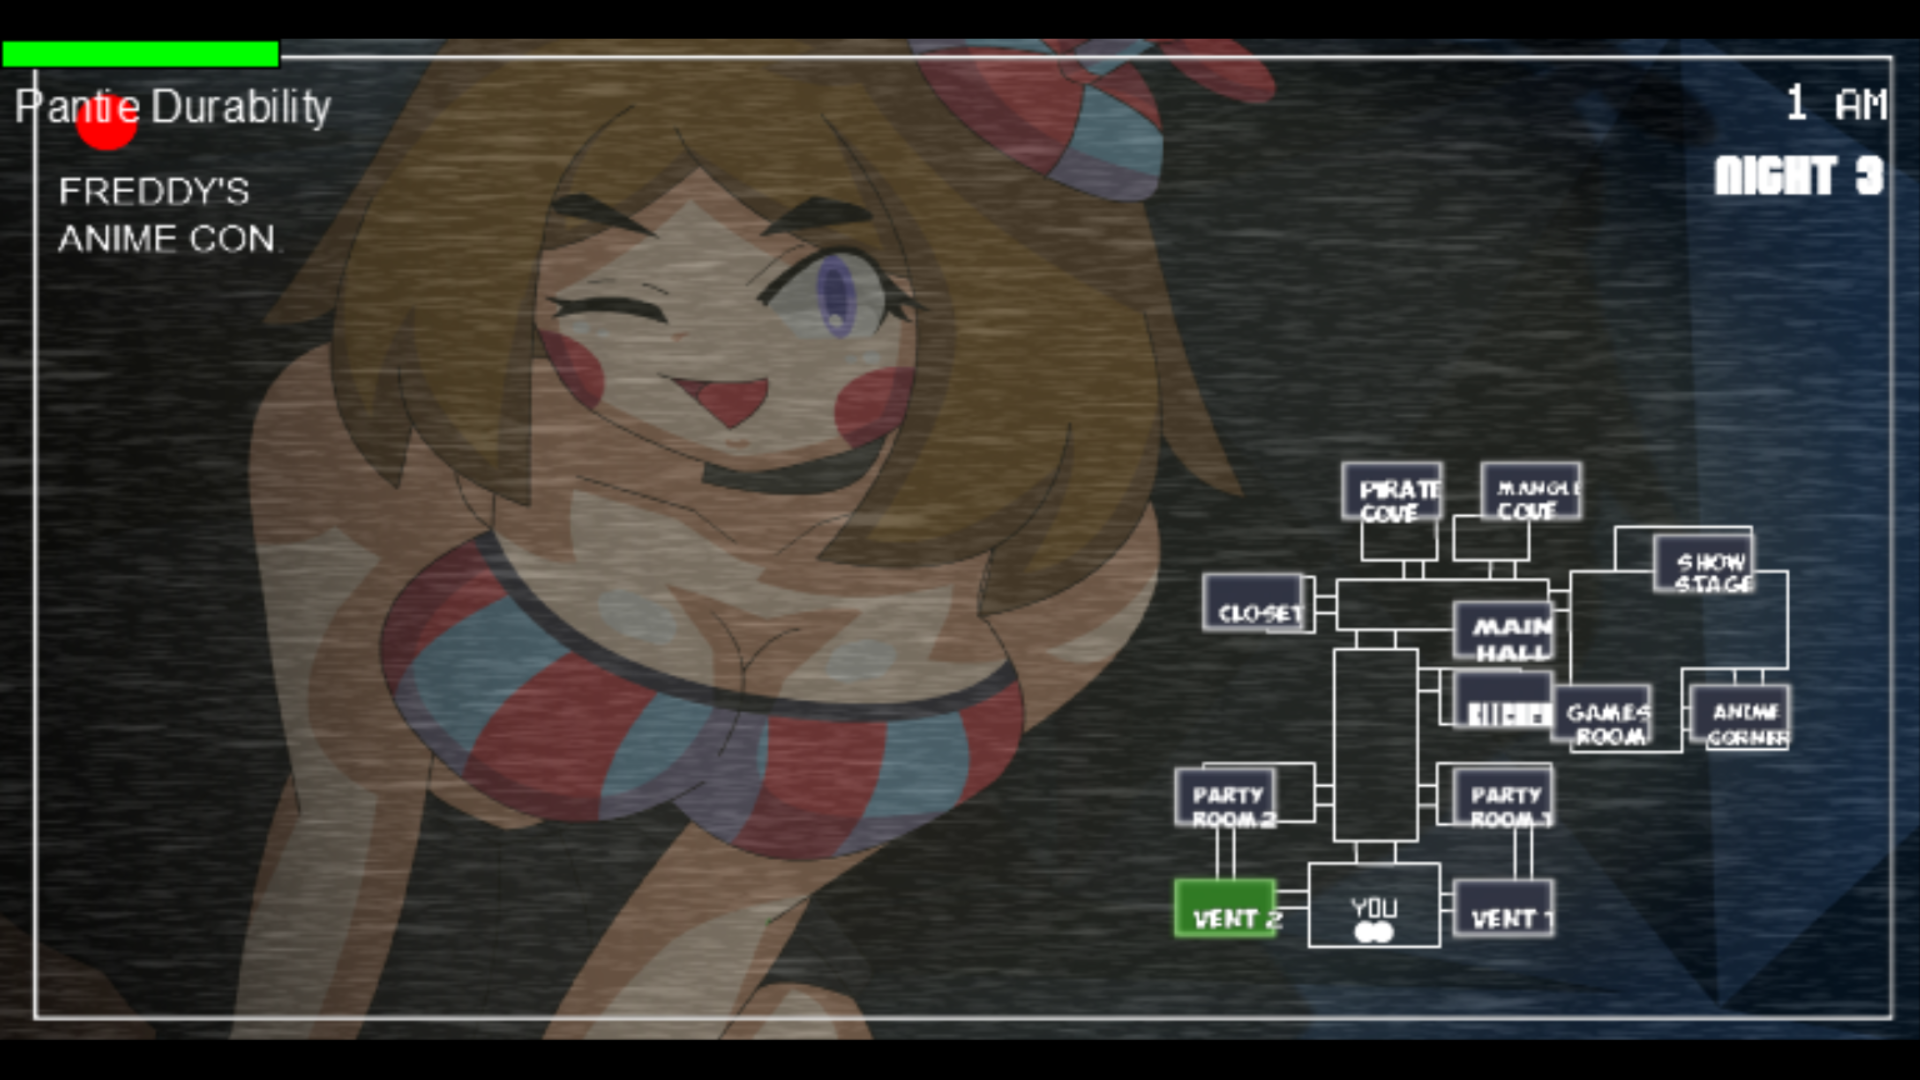 five nights at anime game download